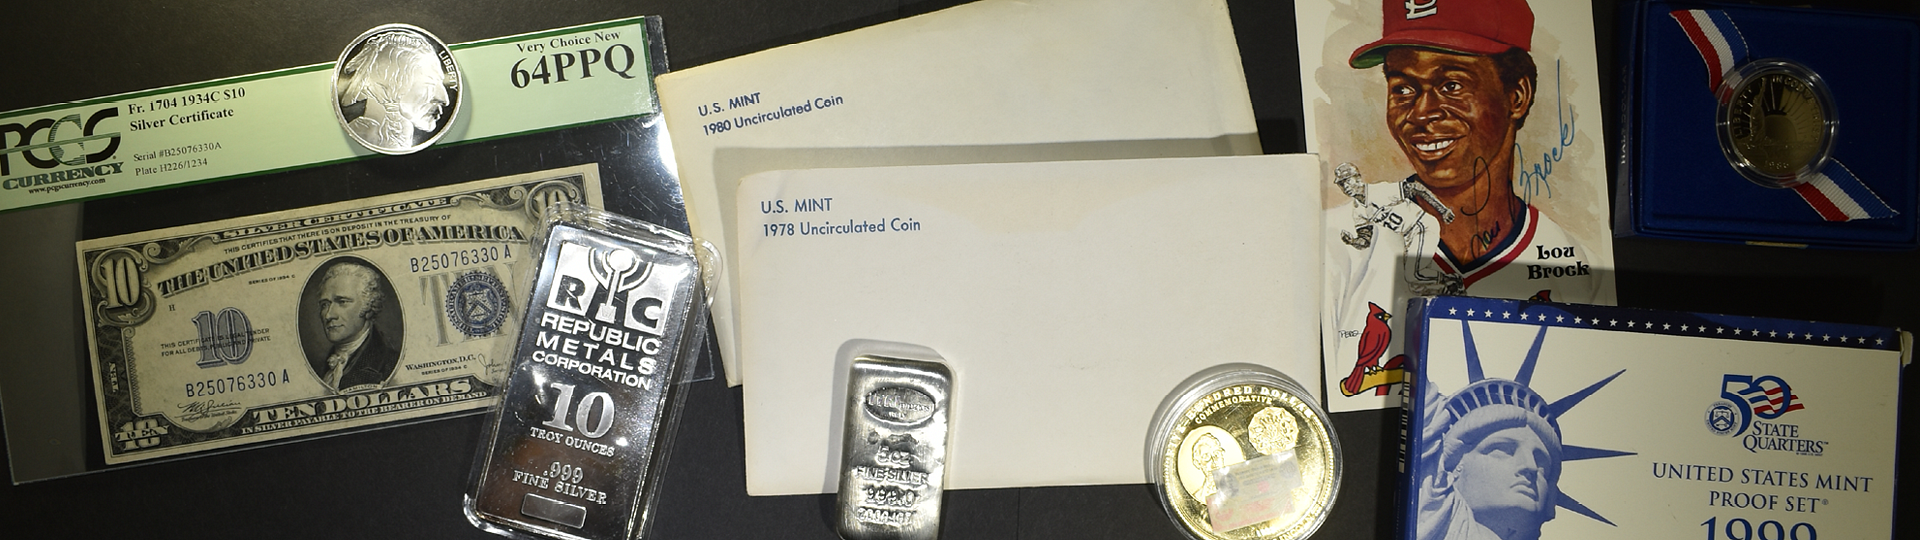 April 2nd Silver City Rare Coins & Sports by Silver City Auctions